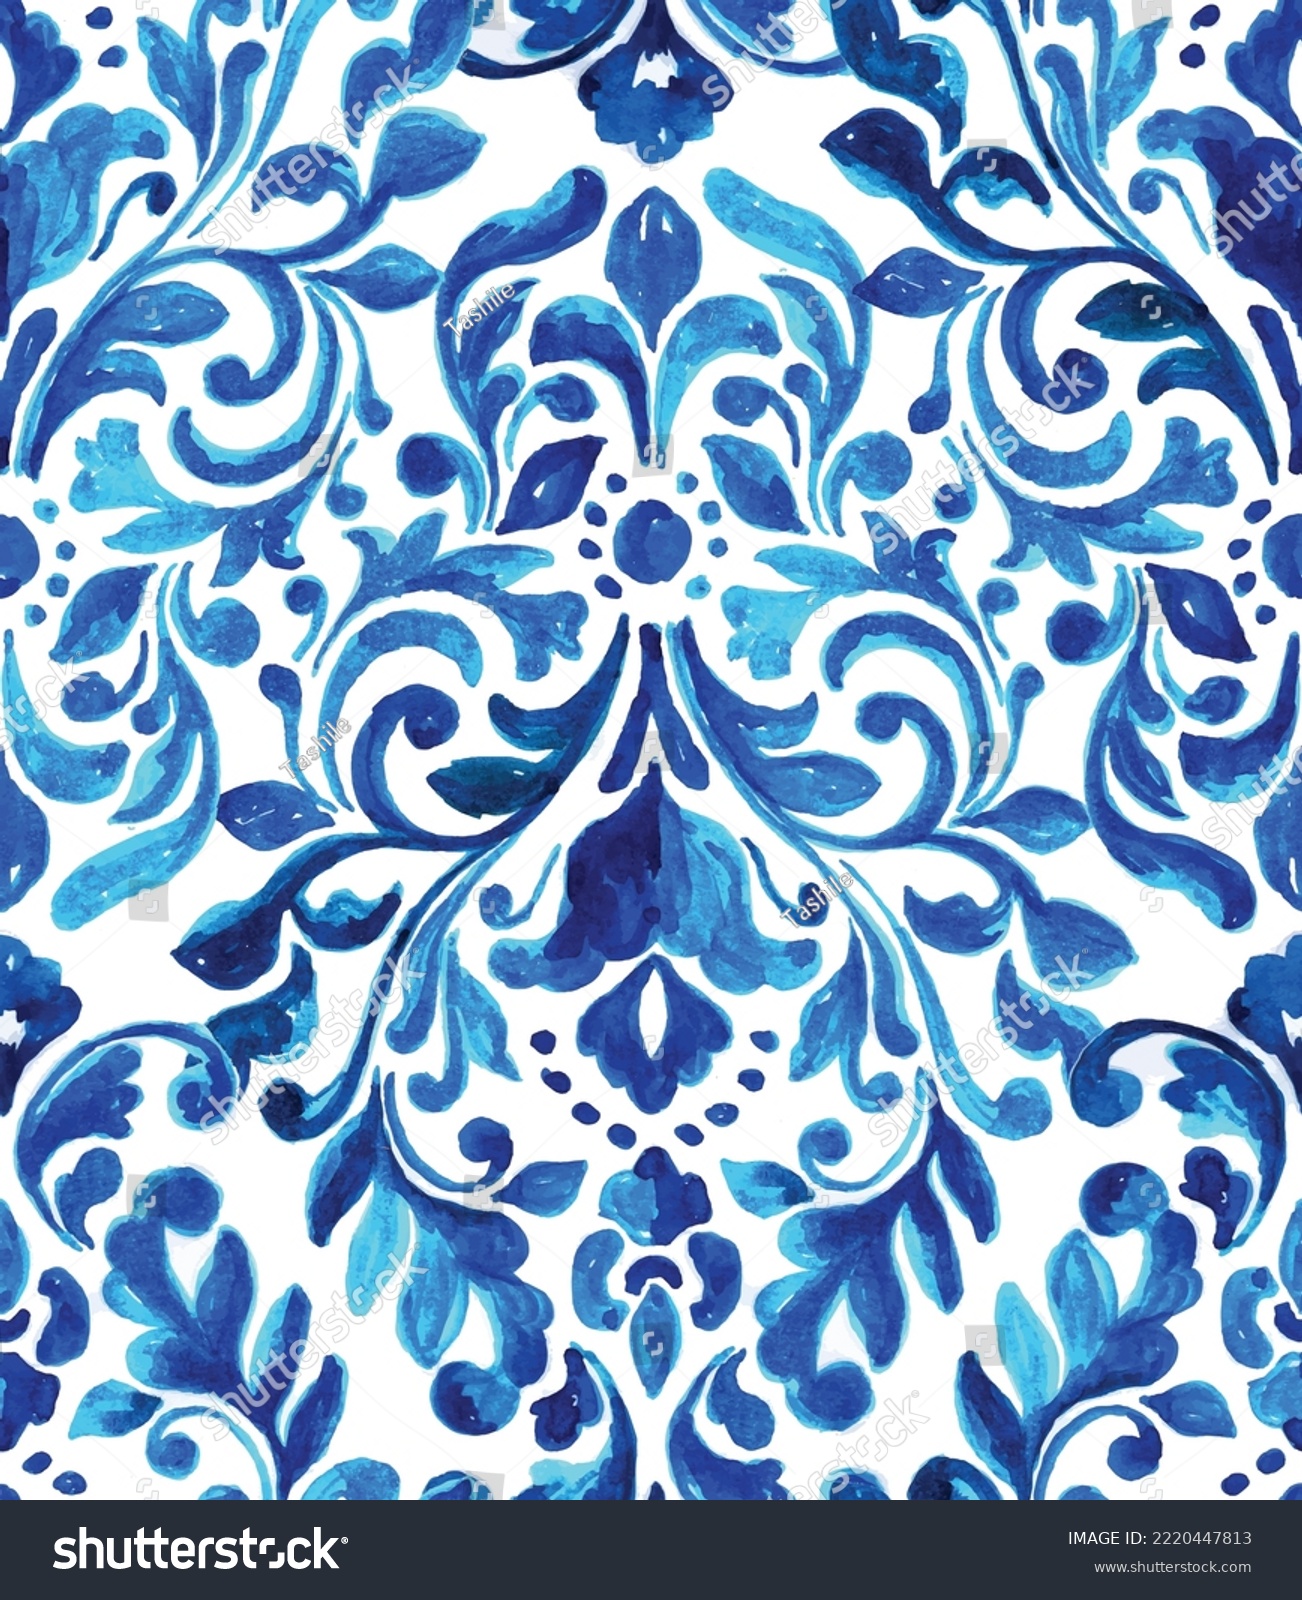  Seamless vintage ornamental watercolor paint pattern for fabric and ceramic tile. Indigo Portuguese abstract filigree background. Classic Blue damask, hand drawn floral design. #2220447813